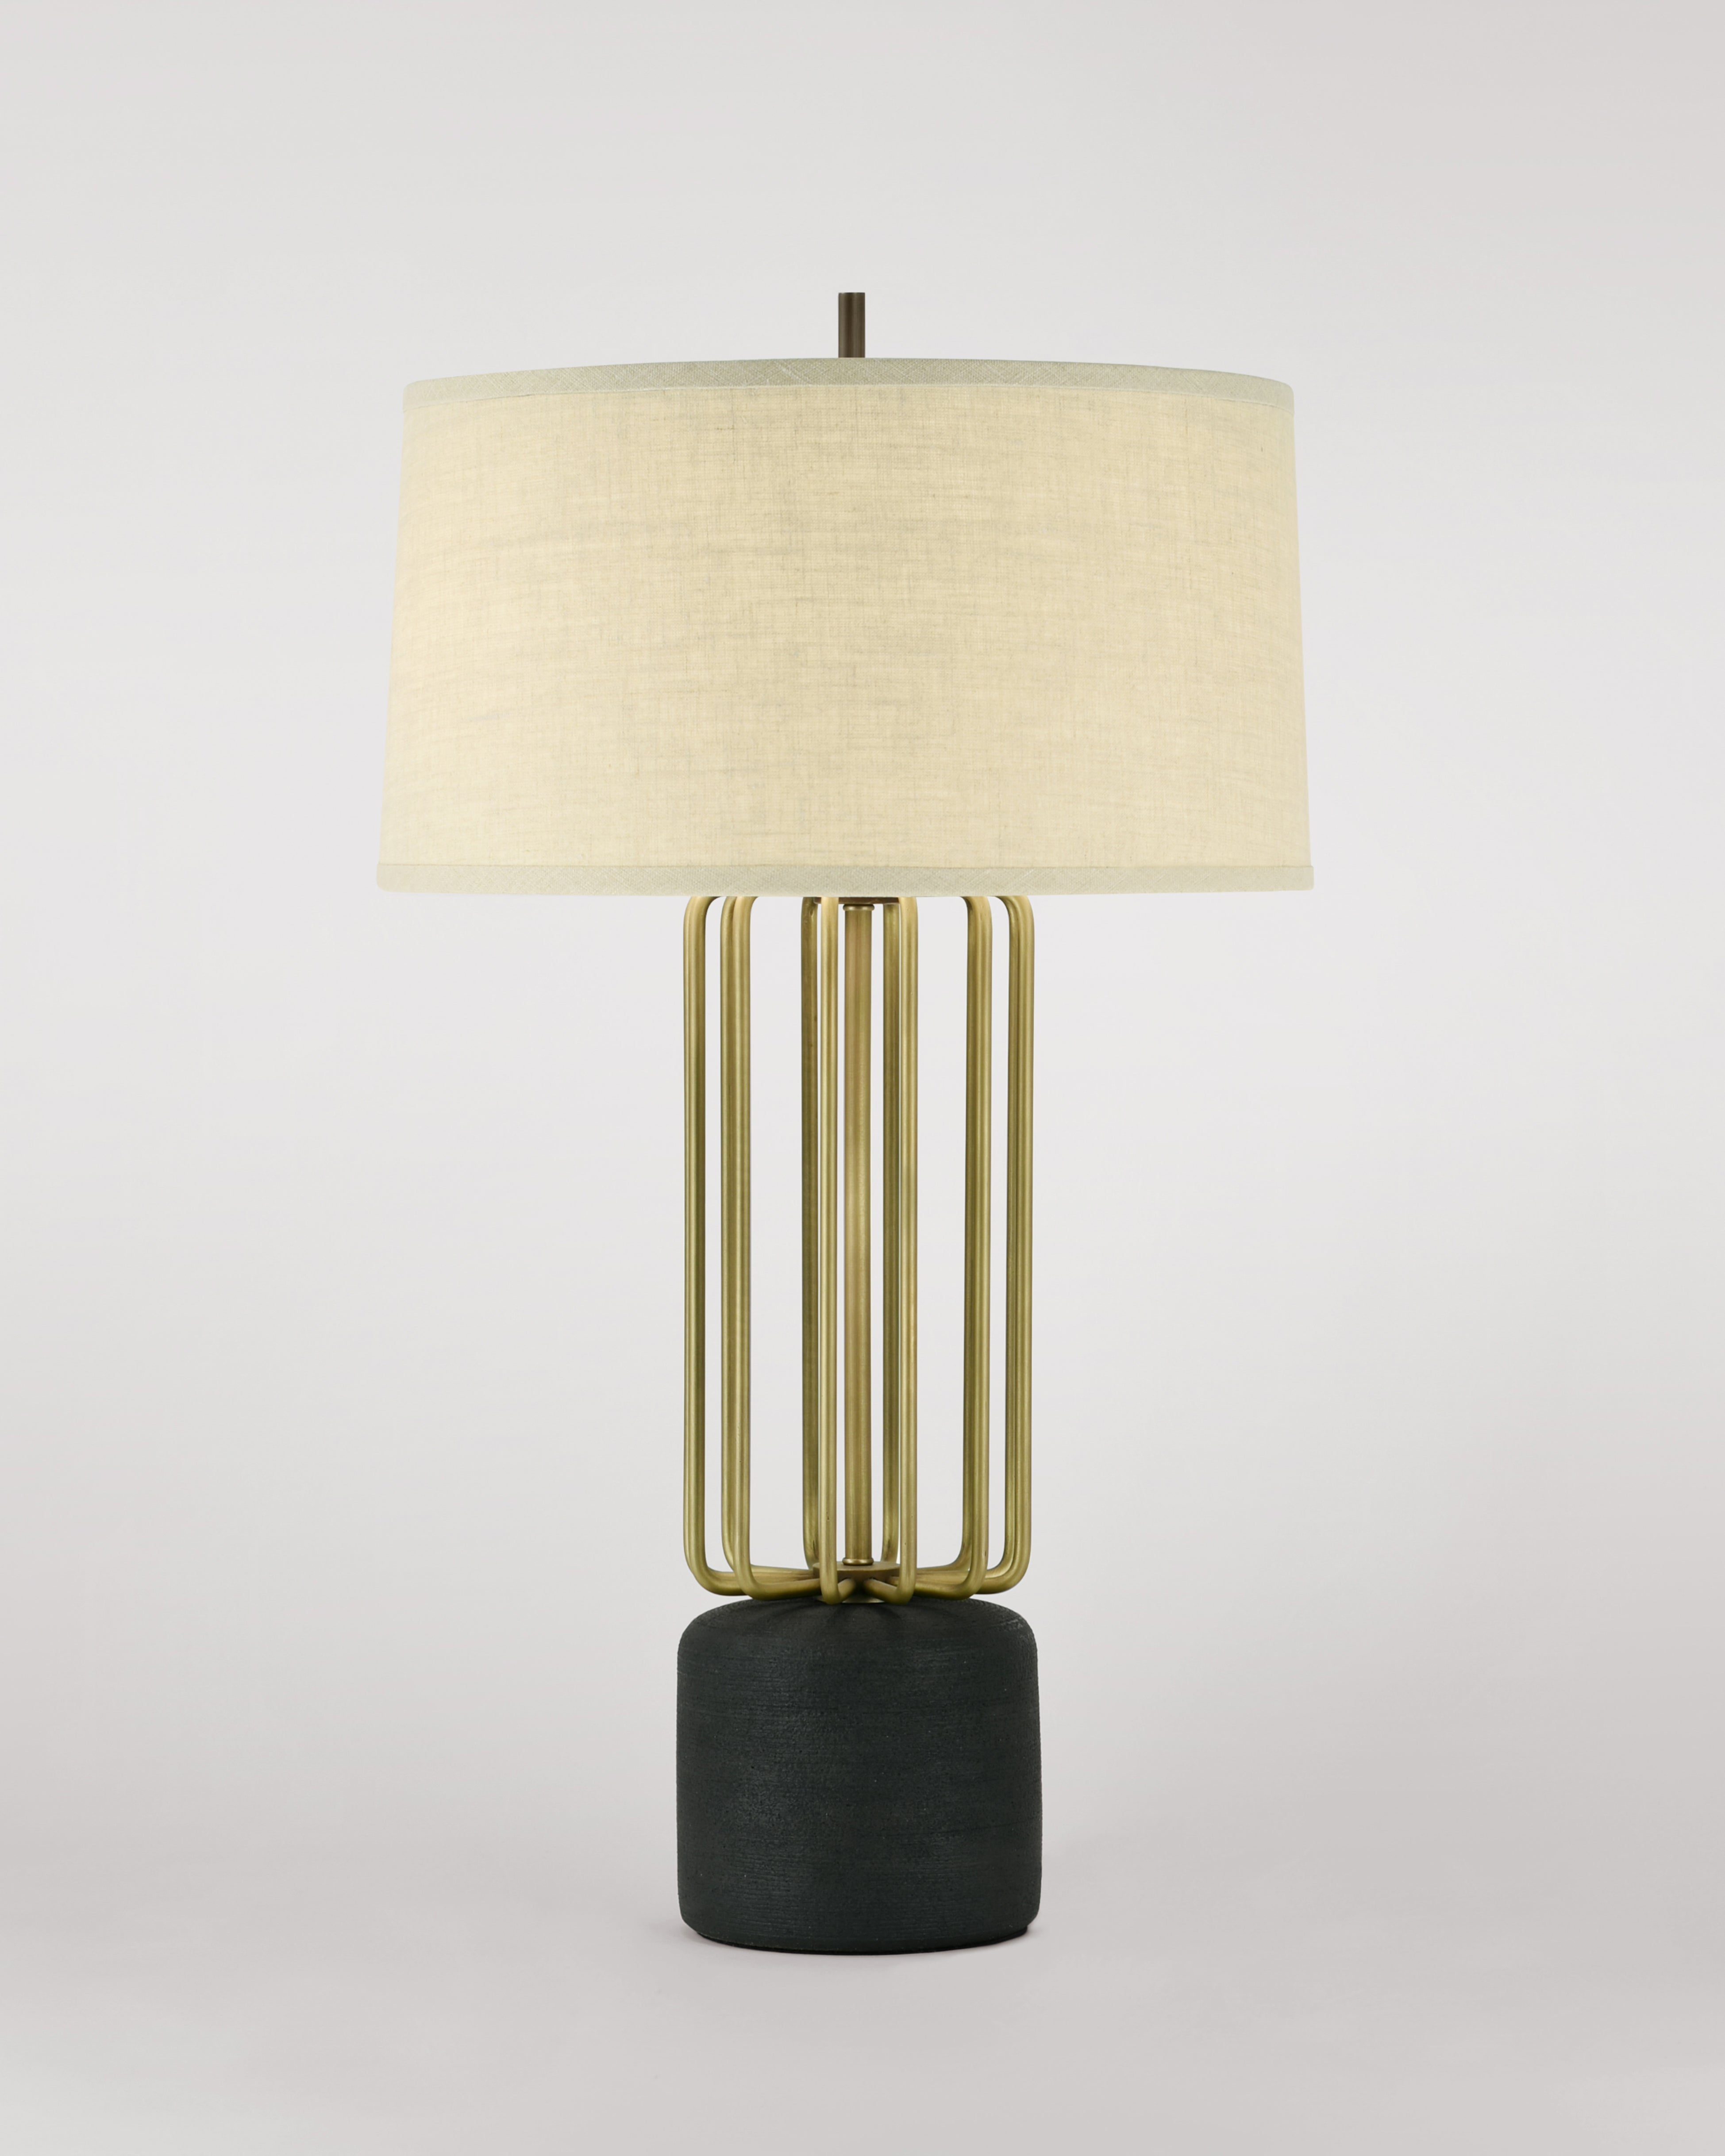 Light Antique Brass with Carbon and Cream Linen